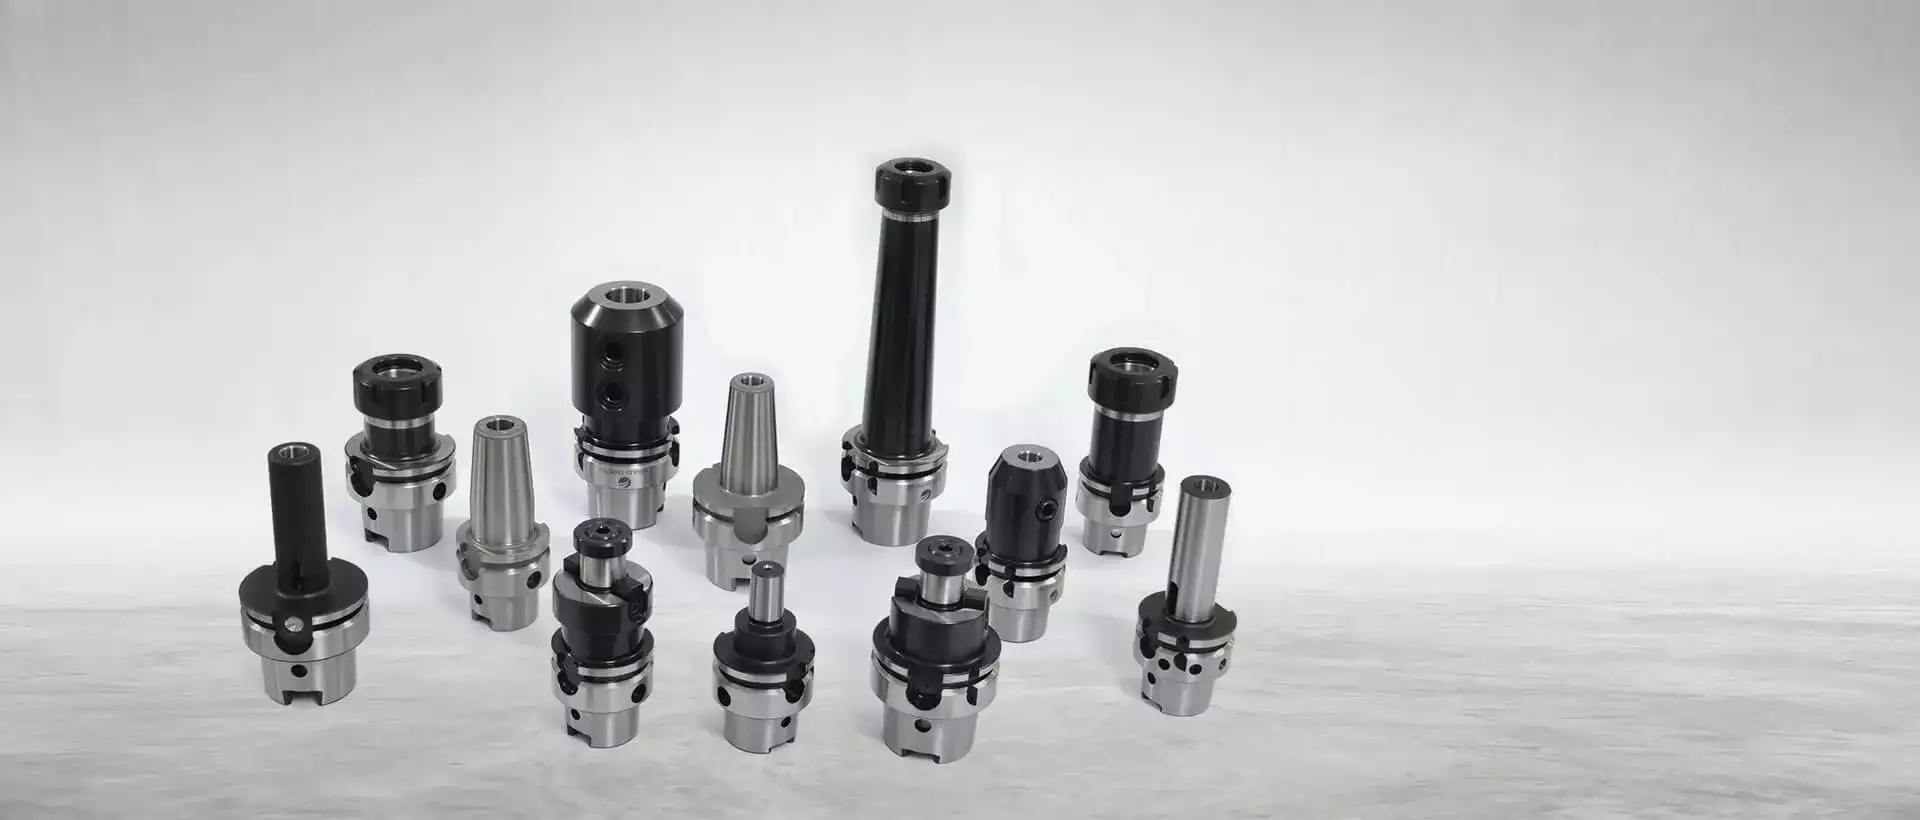 CNC Tool holding systems